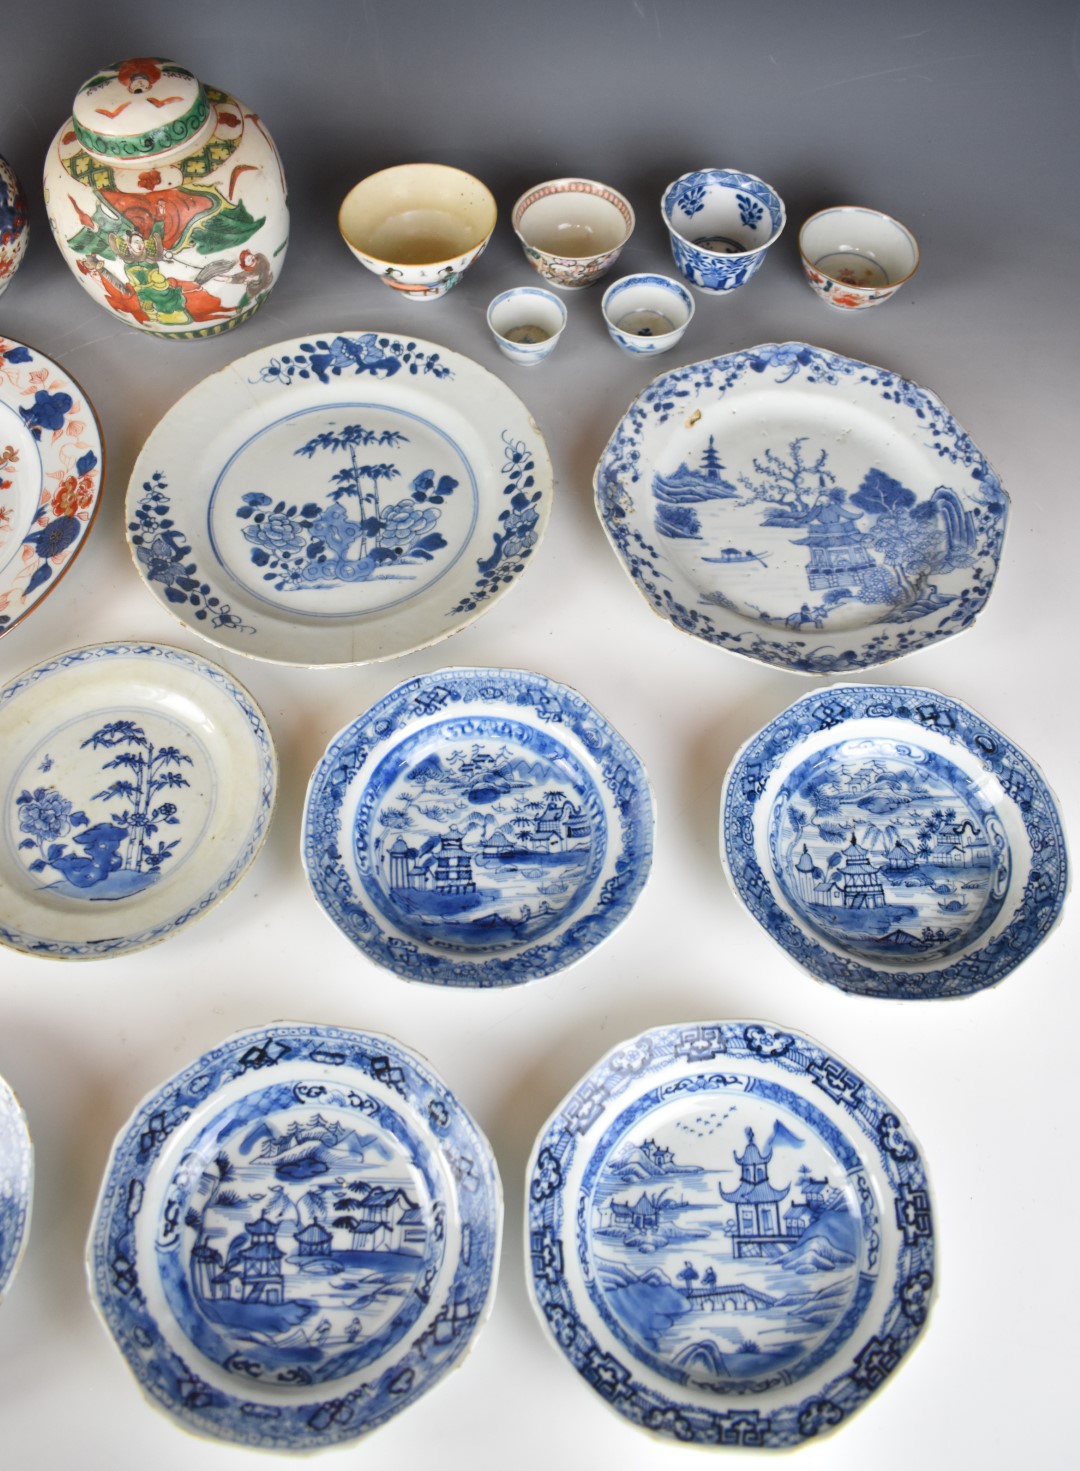 Collection of 18th / 19thC Chinese porcelain tea bowls, wine cups, vase, ginger jar, export plates - Image 11 of 12